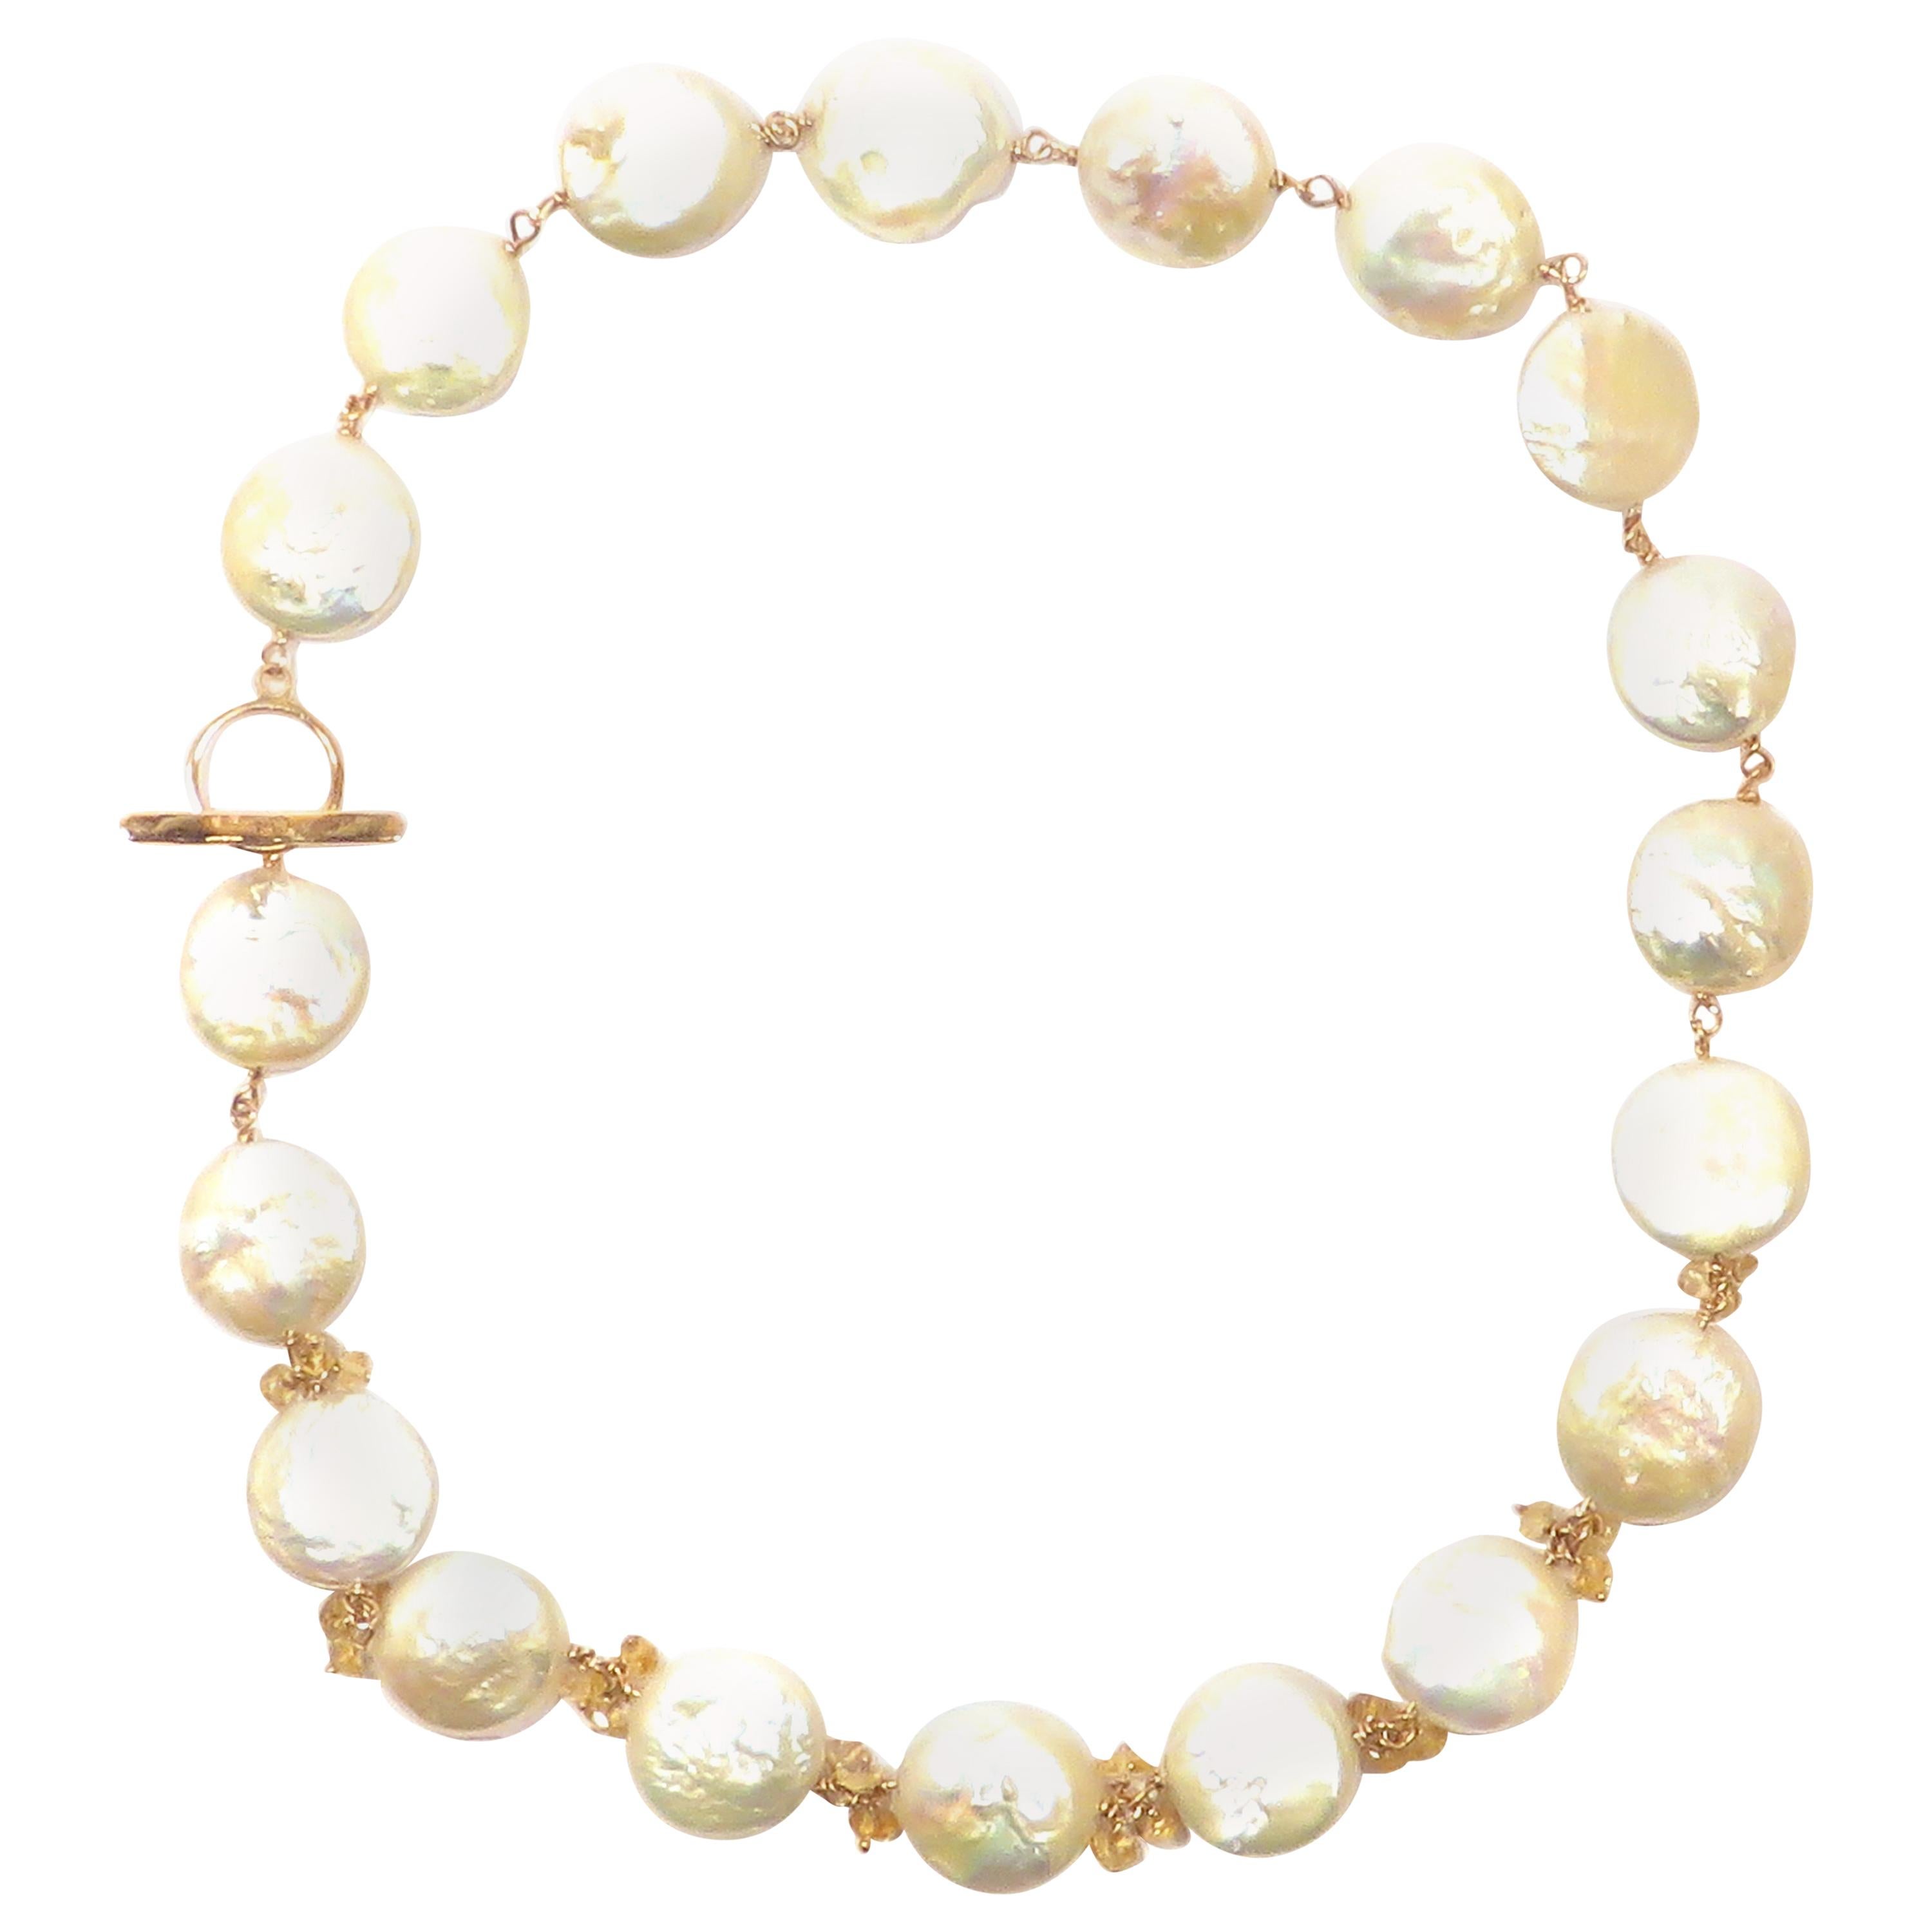 Pearls Citrines 9 Karat Gold Necklace Handcrafted in Italy by Botta Gioielli